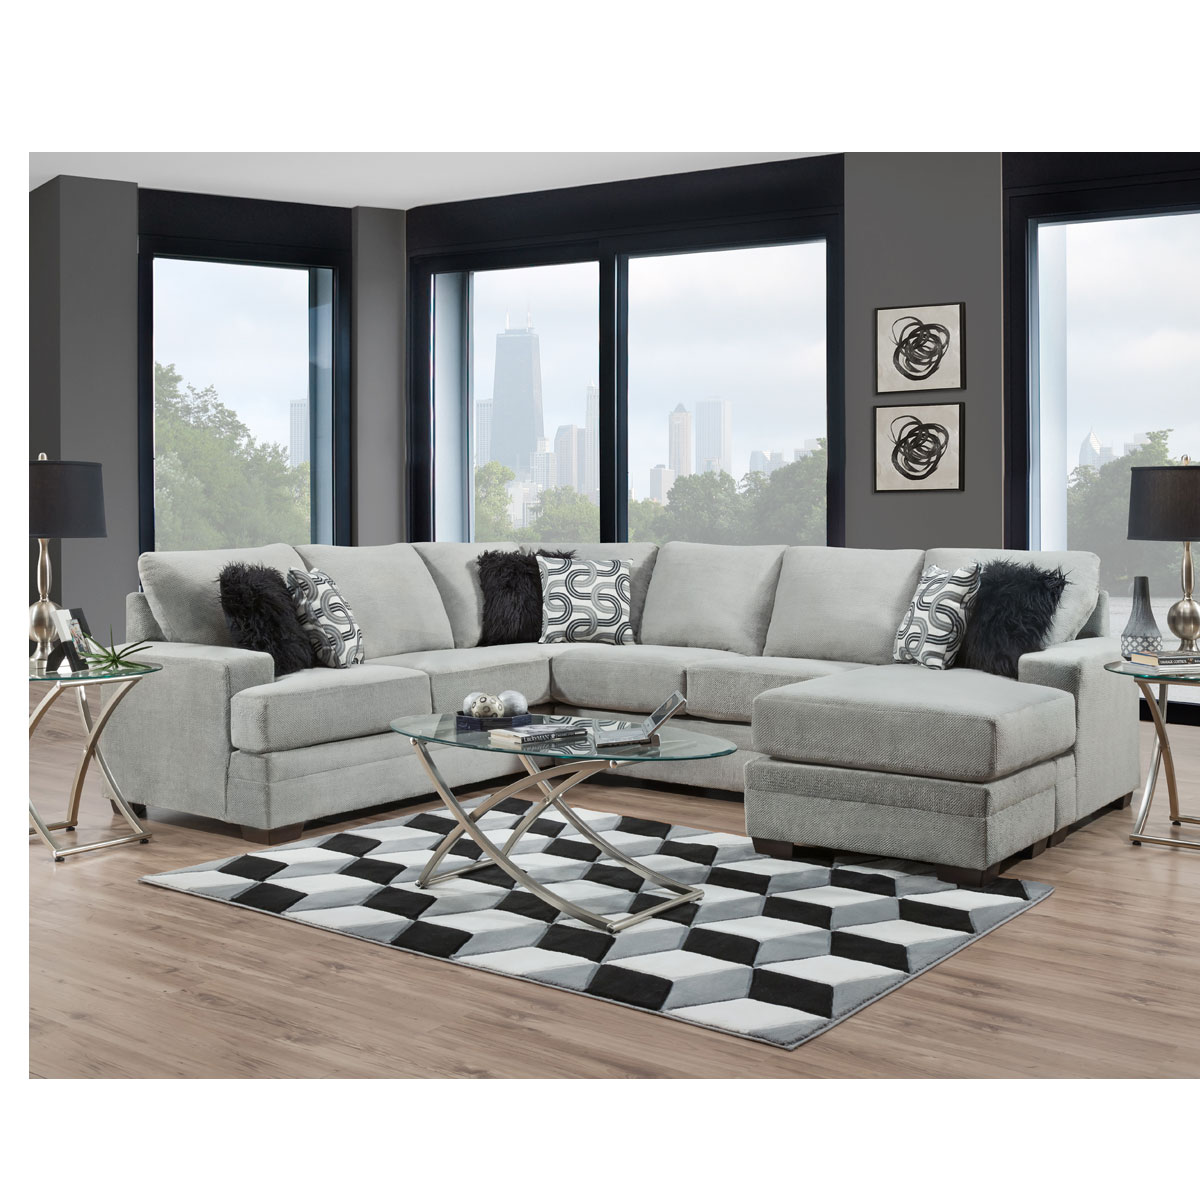 COOPER PLATINUM LIVING ROOM SECTIONAL | Cook Brothers